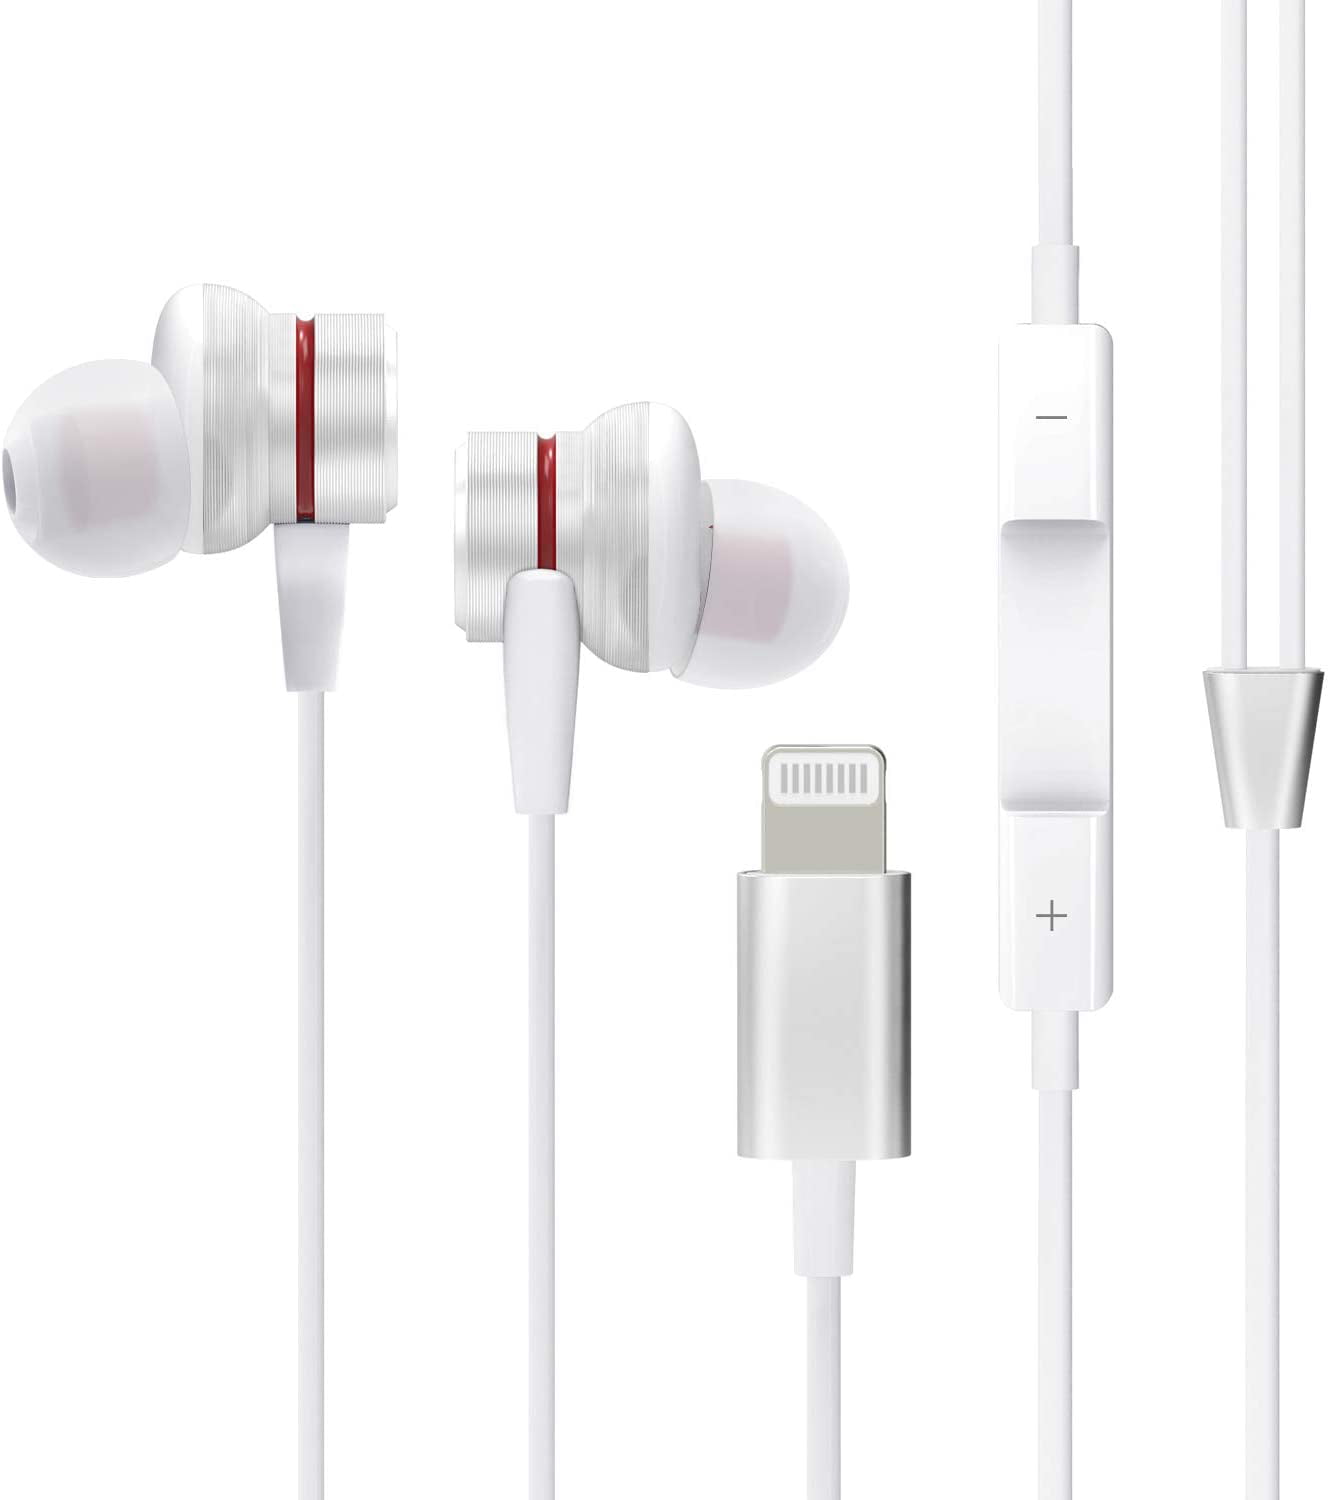 2 Pack Earbuds Earphone,Wired in-Ear Headphones with Bluetooth,Noise Reduction Function with Built-in Microphone and Volume Control Compatible with iPhone12/ 12 Pro/11/11 Pro/XR/XS Max/X /8 Plus 